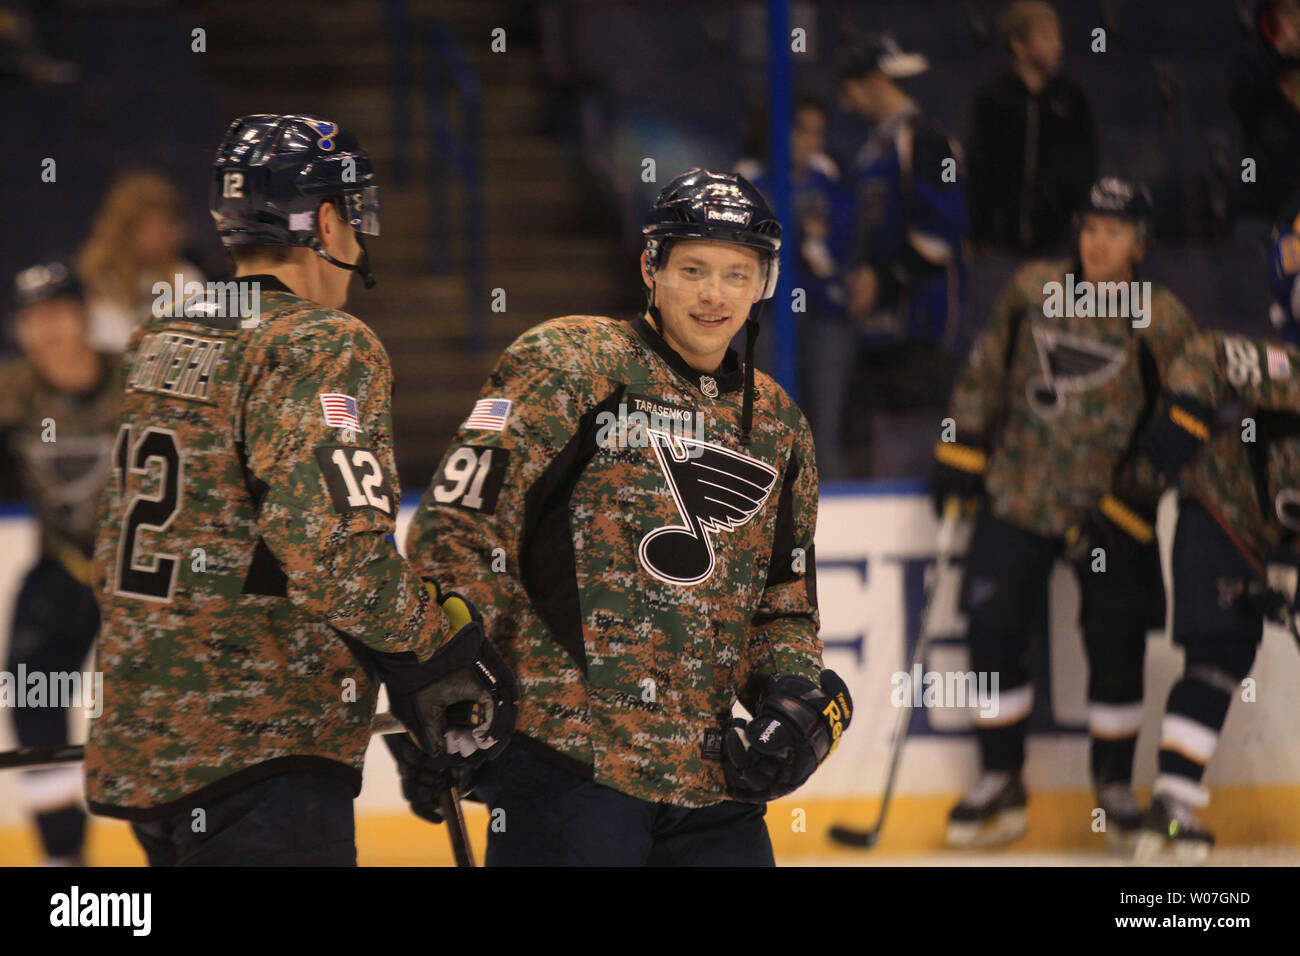 St. Louis Blues Vladimir Tarasenko of Russia, wears a camouflage jersey  during pre game skate before a game against the Buffalo Sabres at the  Scottrade Center in St. Louis on November 11